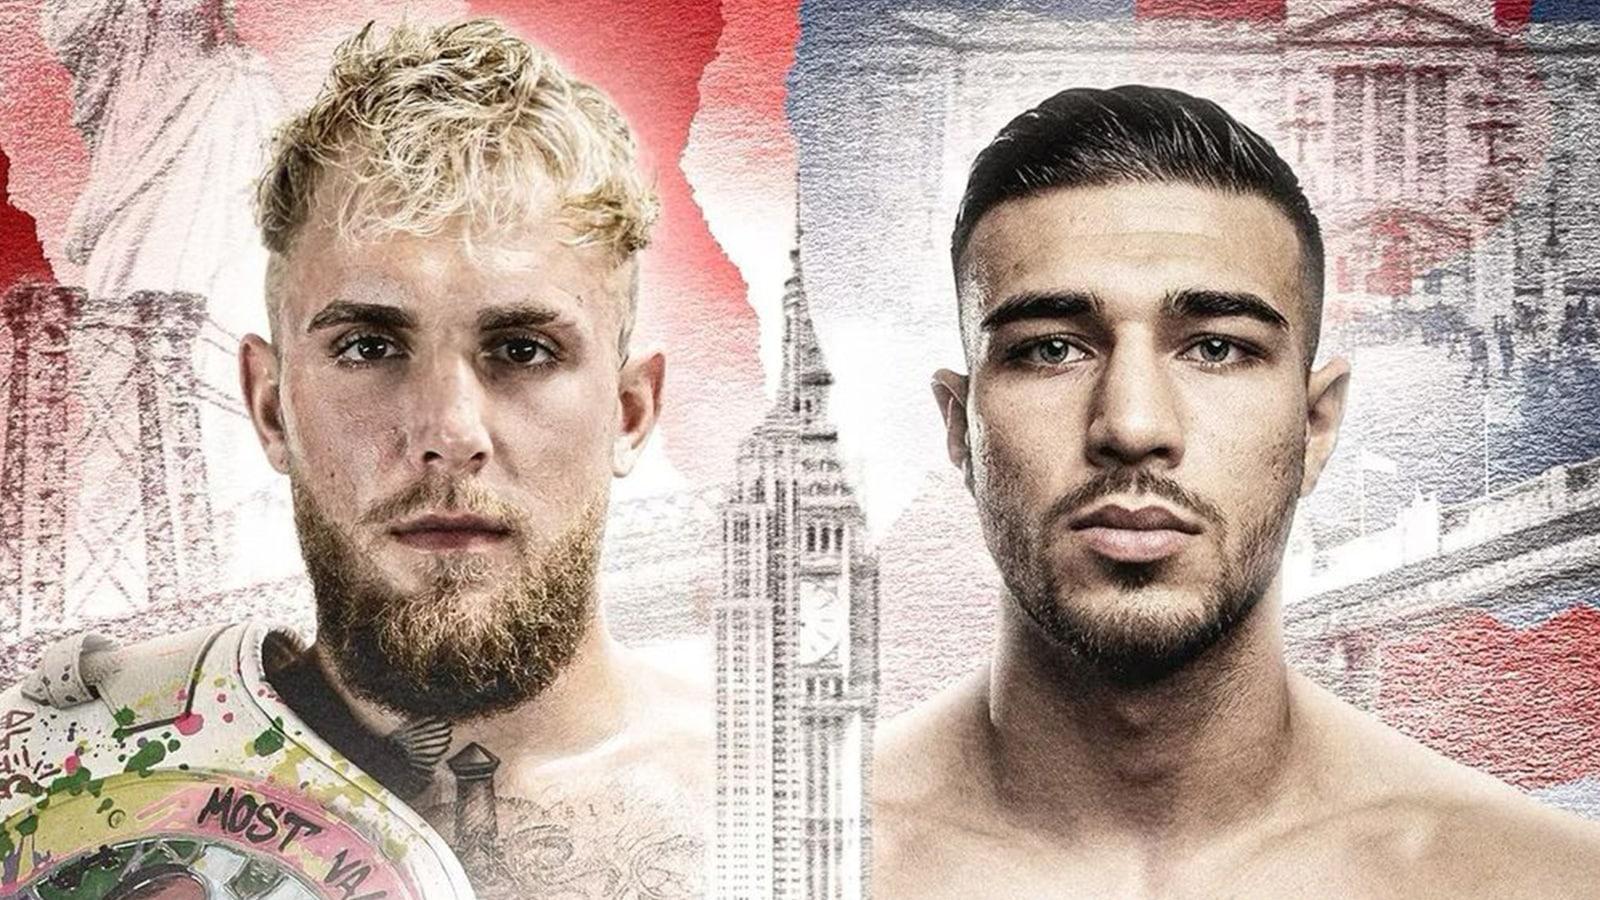 How to watch Jake Paul vs Tommy Fury 2022